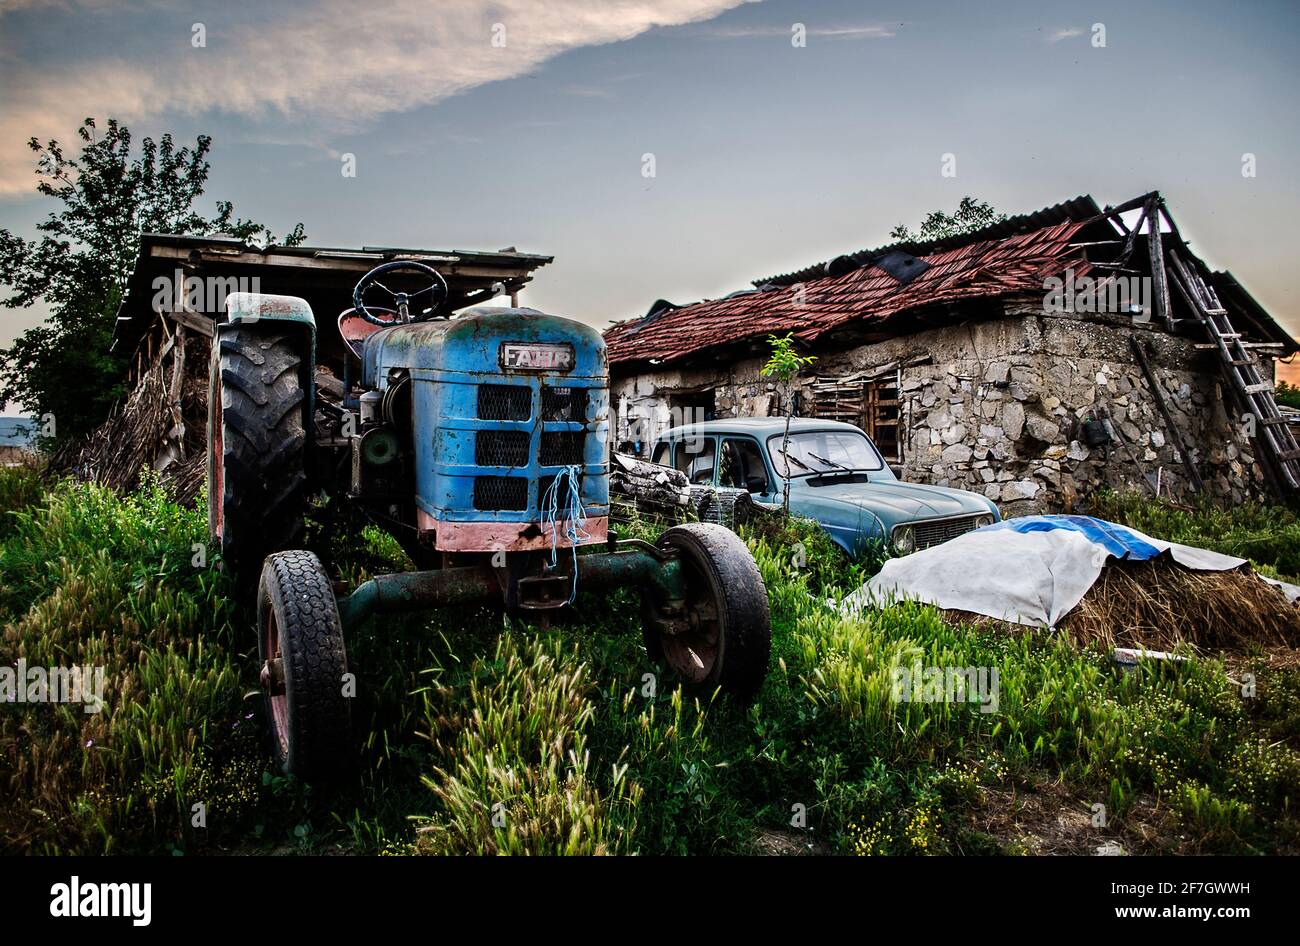 Old agricultural wheeled tractor Deutz-Fahr abandoned in the grass Stock Photo